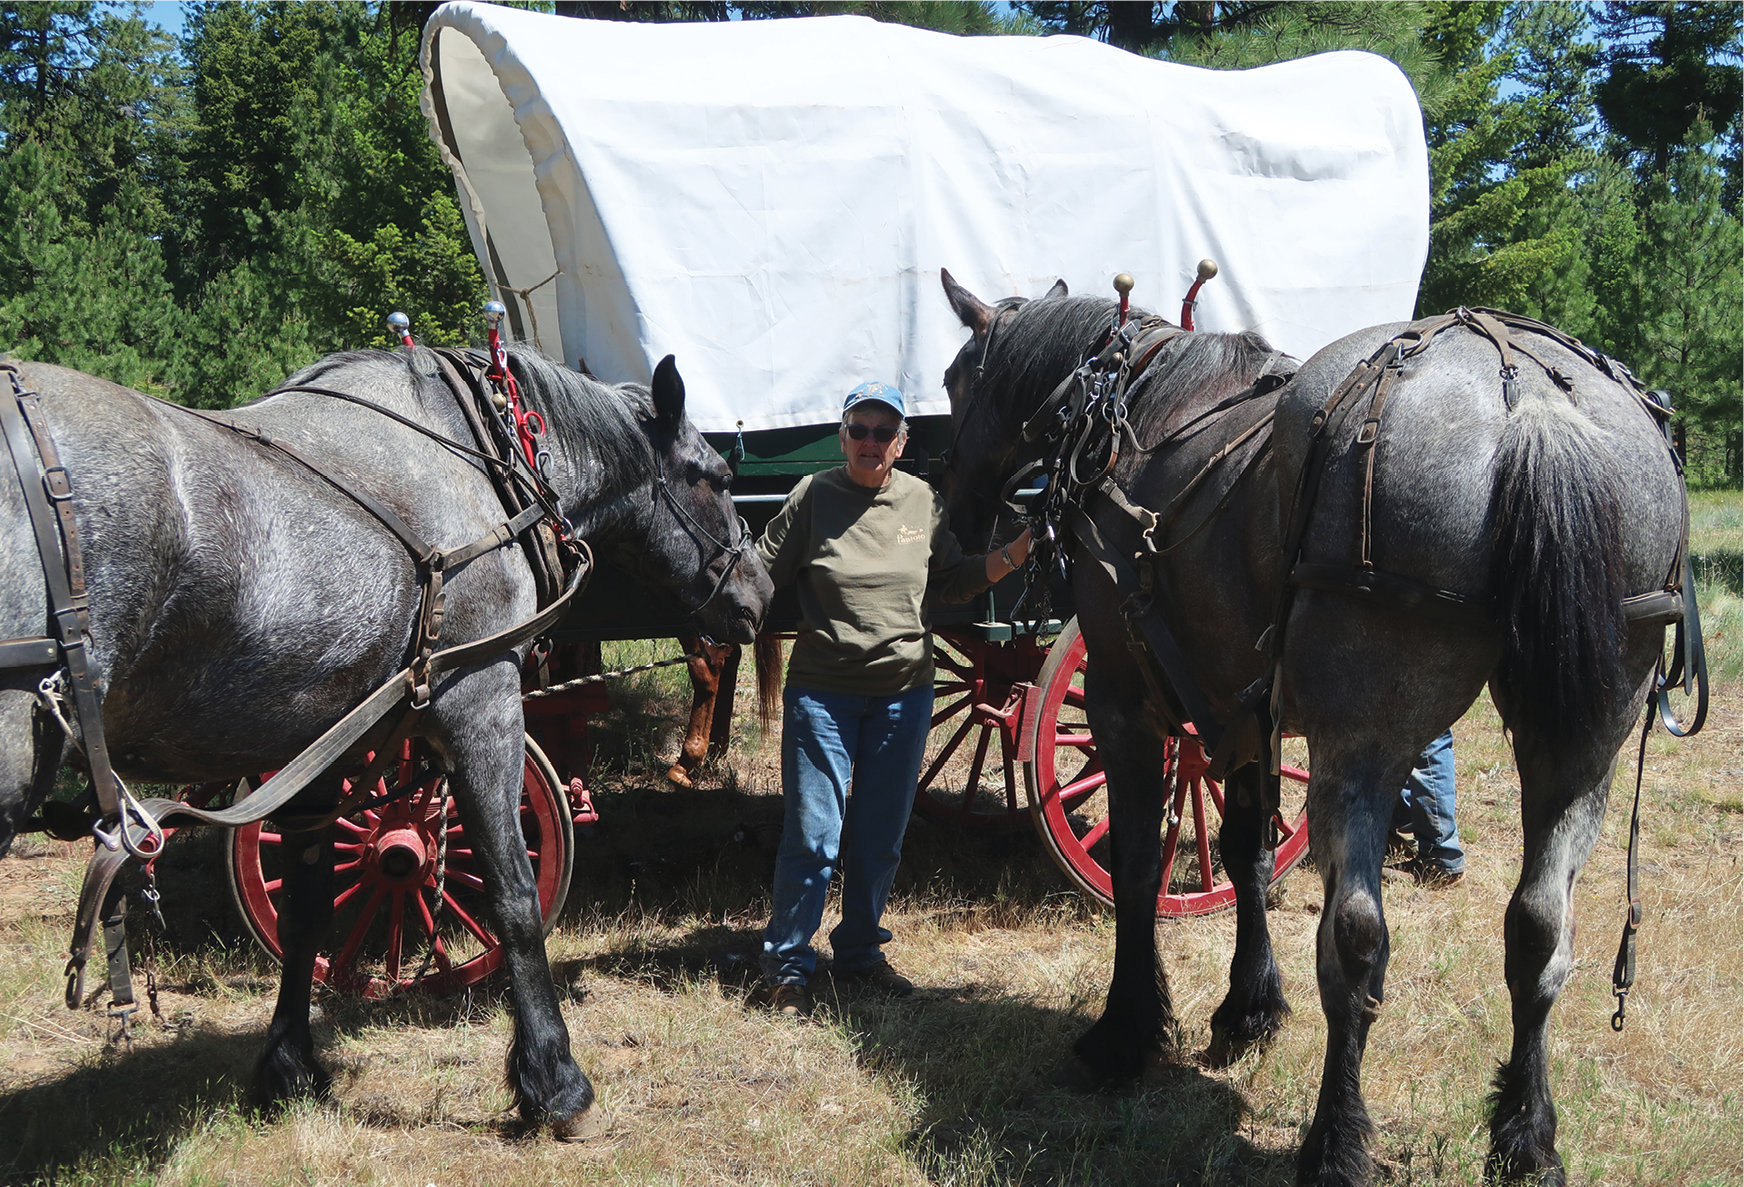 how fast could covered wagon trains travel in the old west